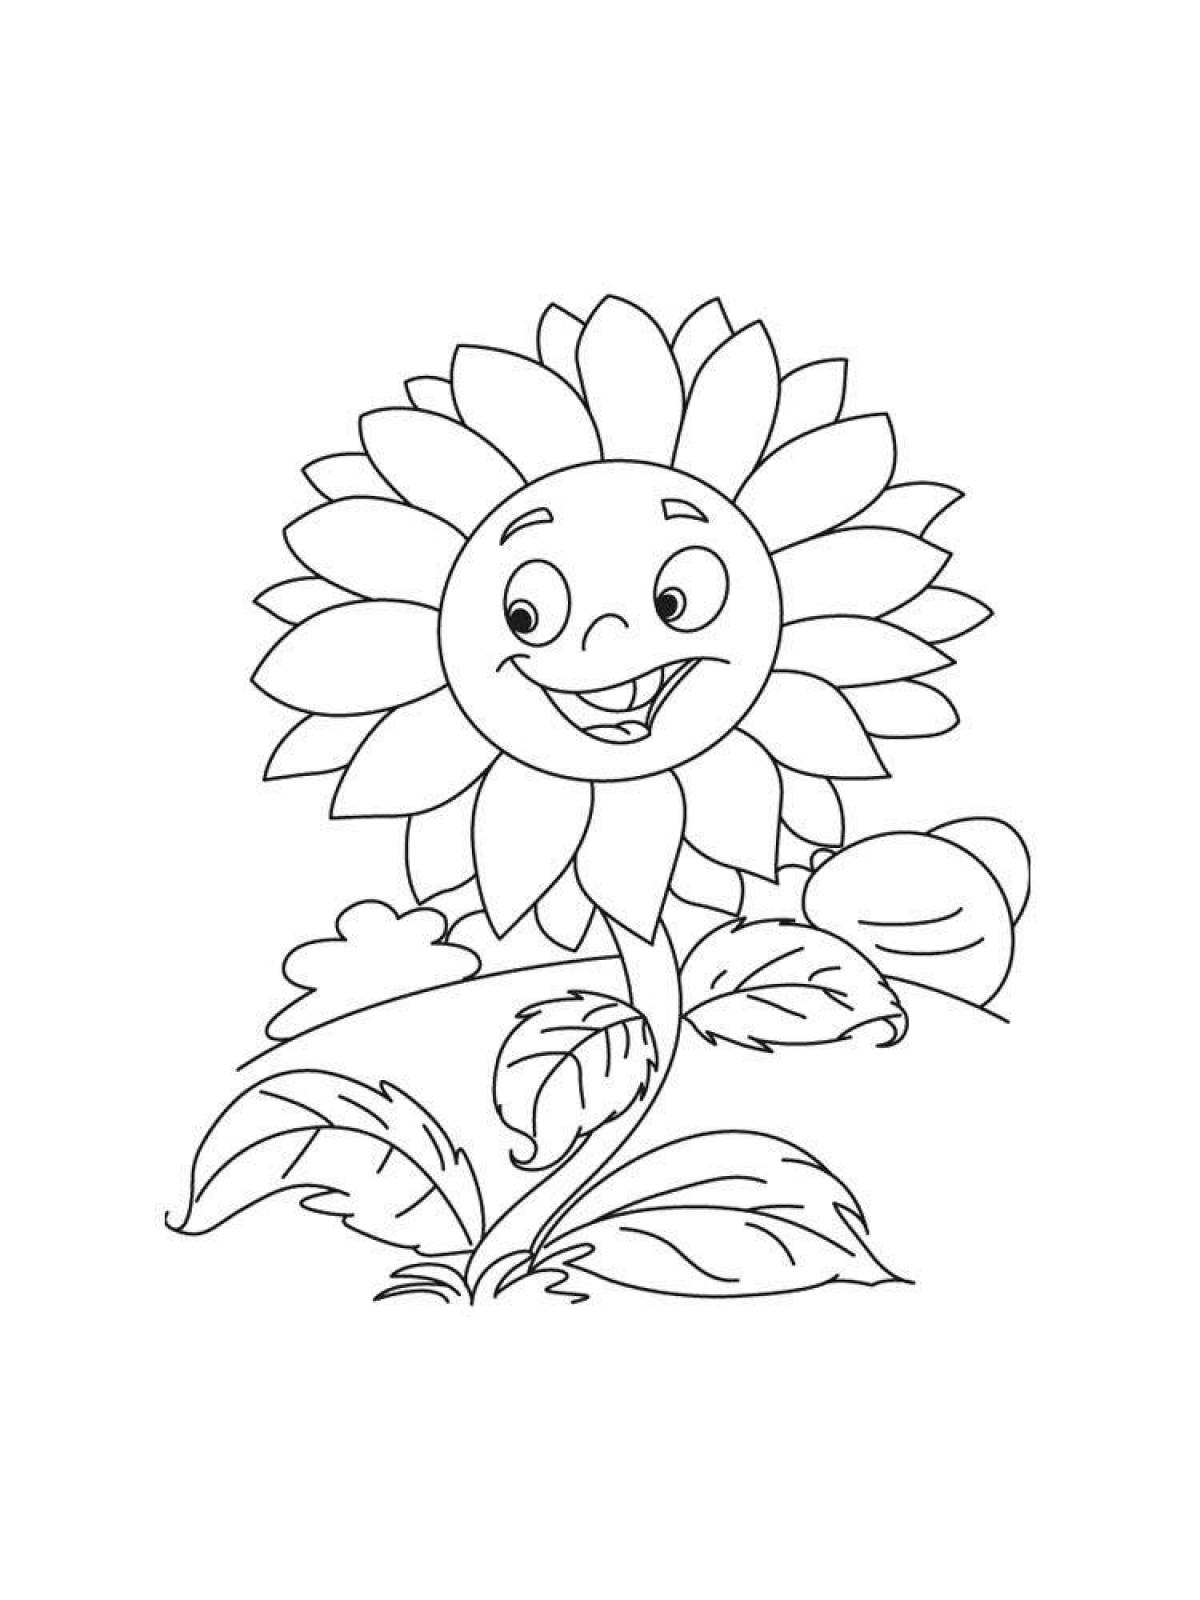 Creative coloring sunflowers for kids